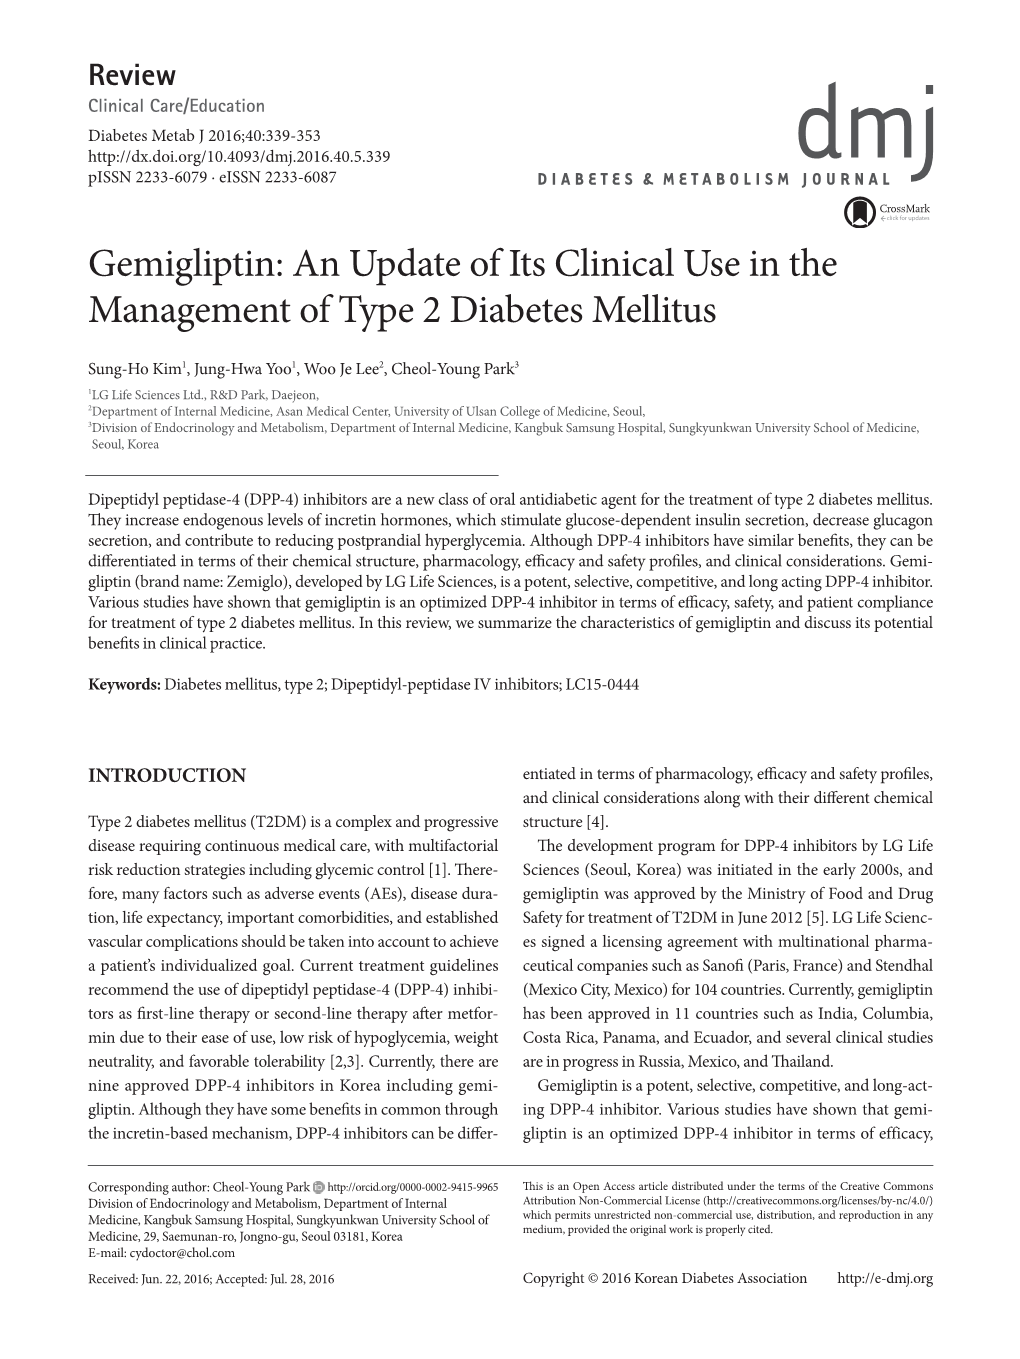 Gemigliptin: an Update of Its Clinical Use in the Management of Type 2 Diabetes Mellitus